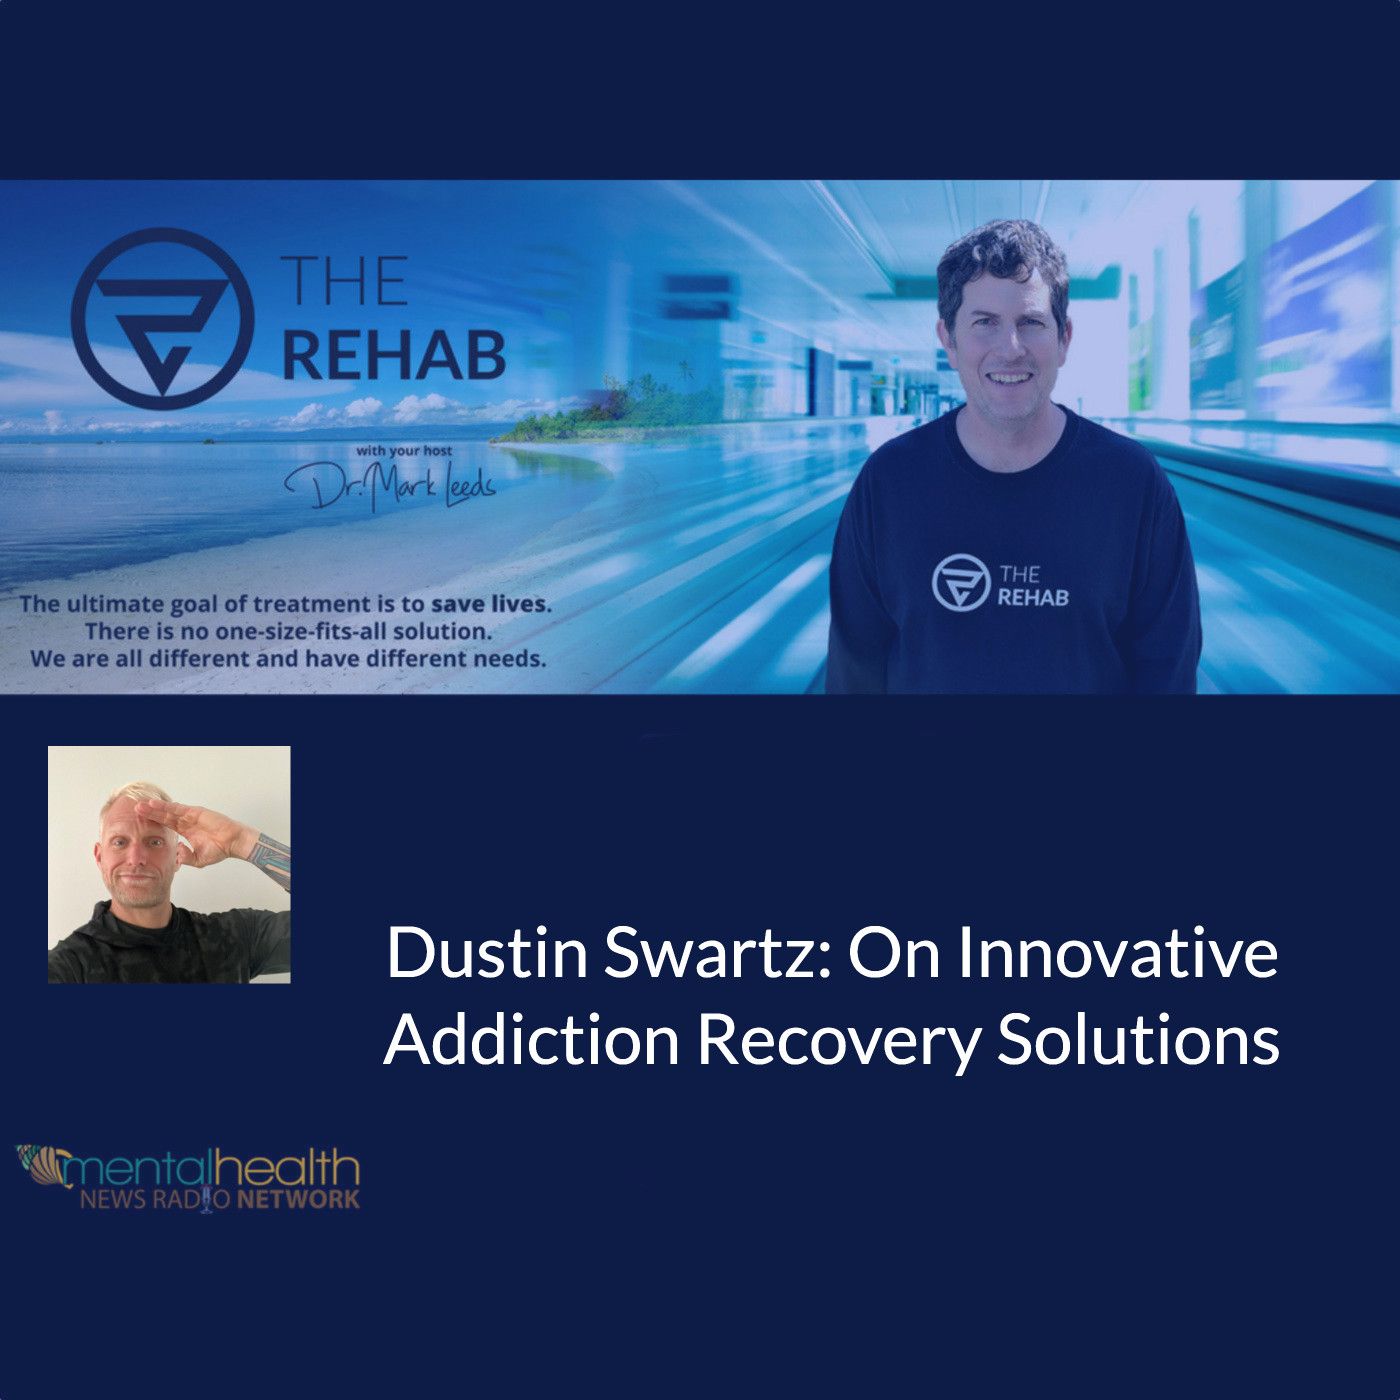 Dustin Swartz: On Innovative Addiction Recovery Solutions